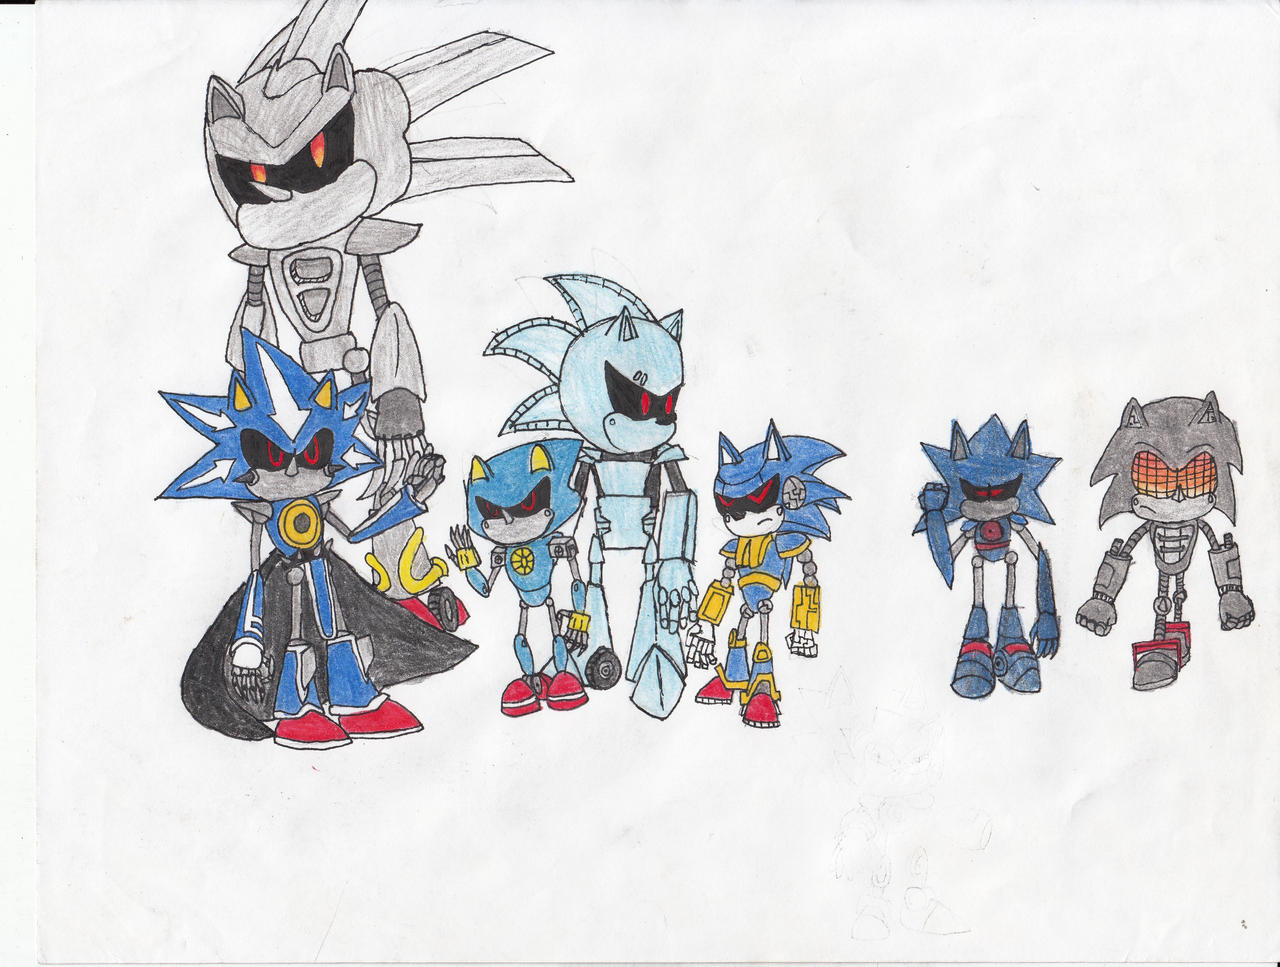 metal sonic (sonic) drawn by laqiraly